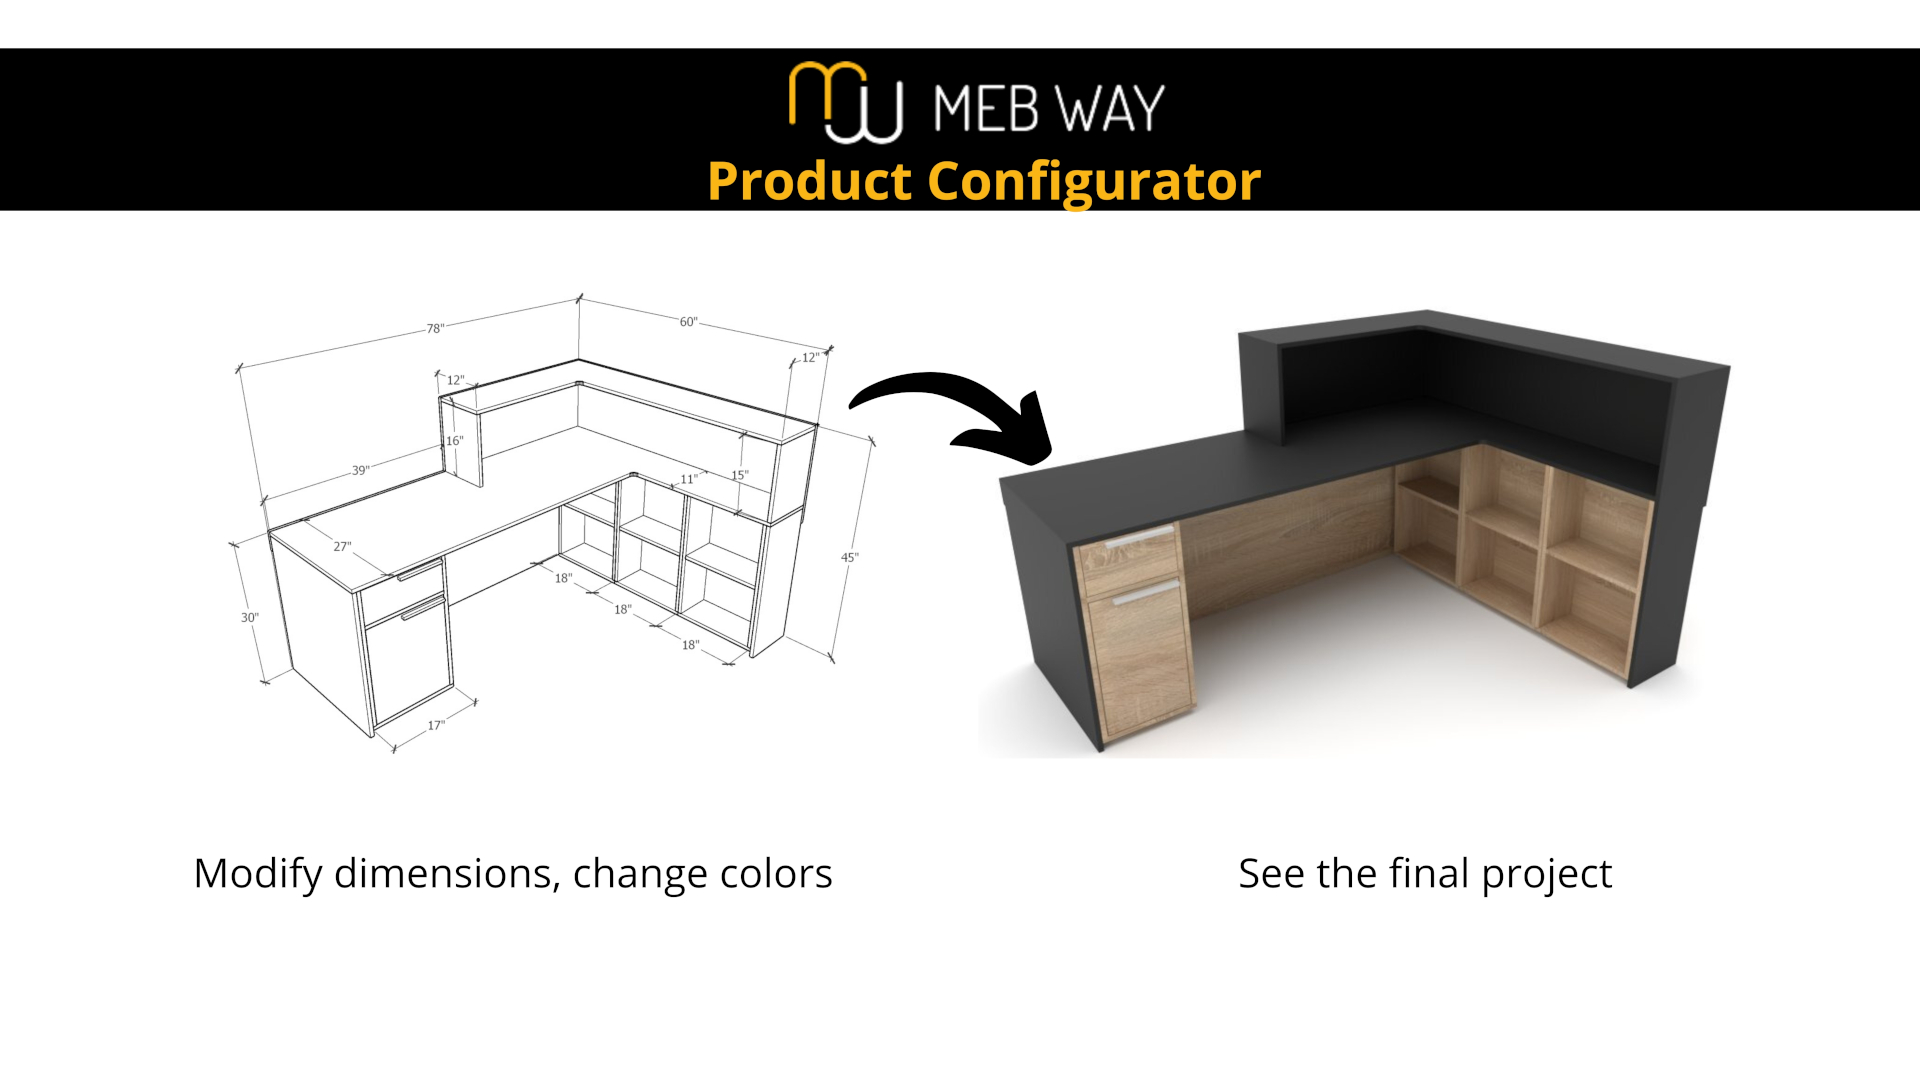 Product Configurator in the Office Furniture Industry: Customized Solutions for Your Office